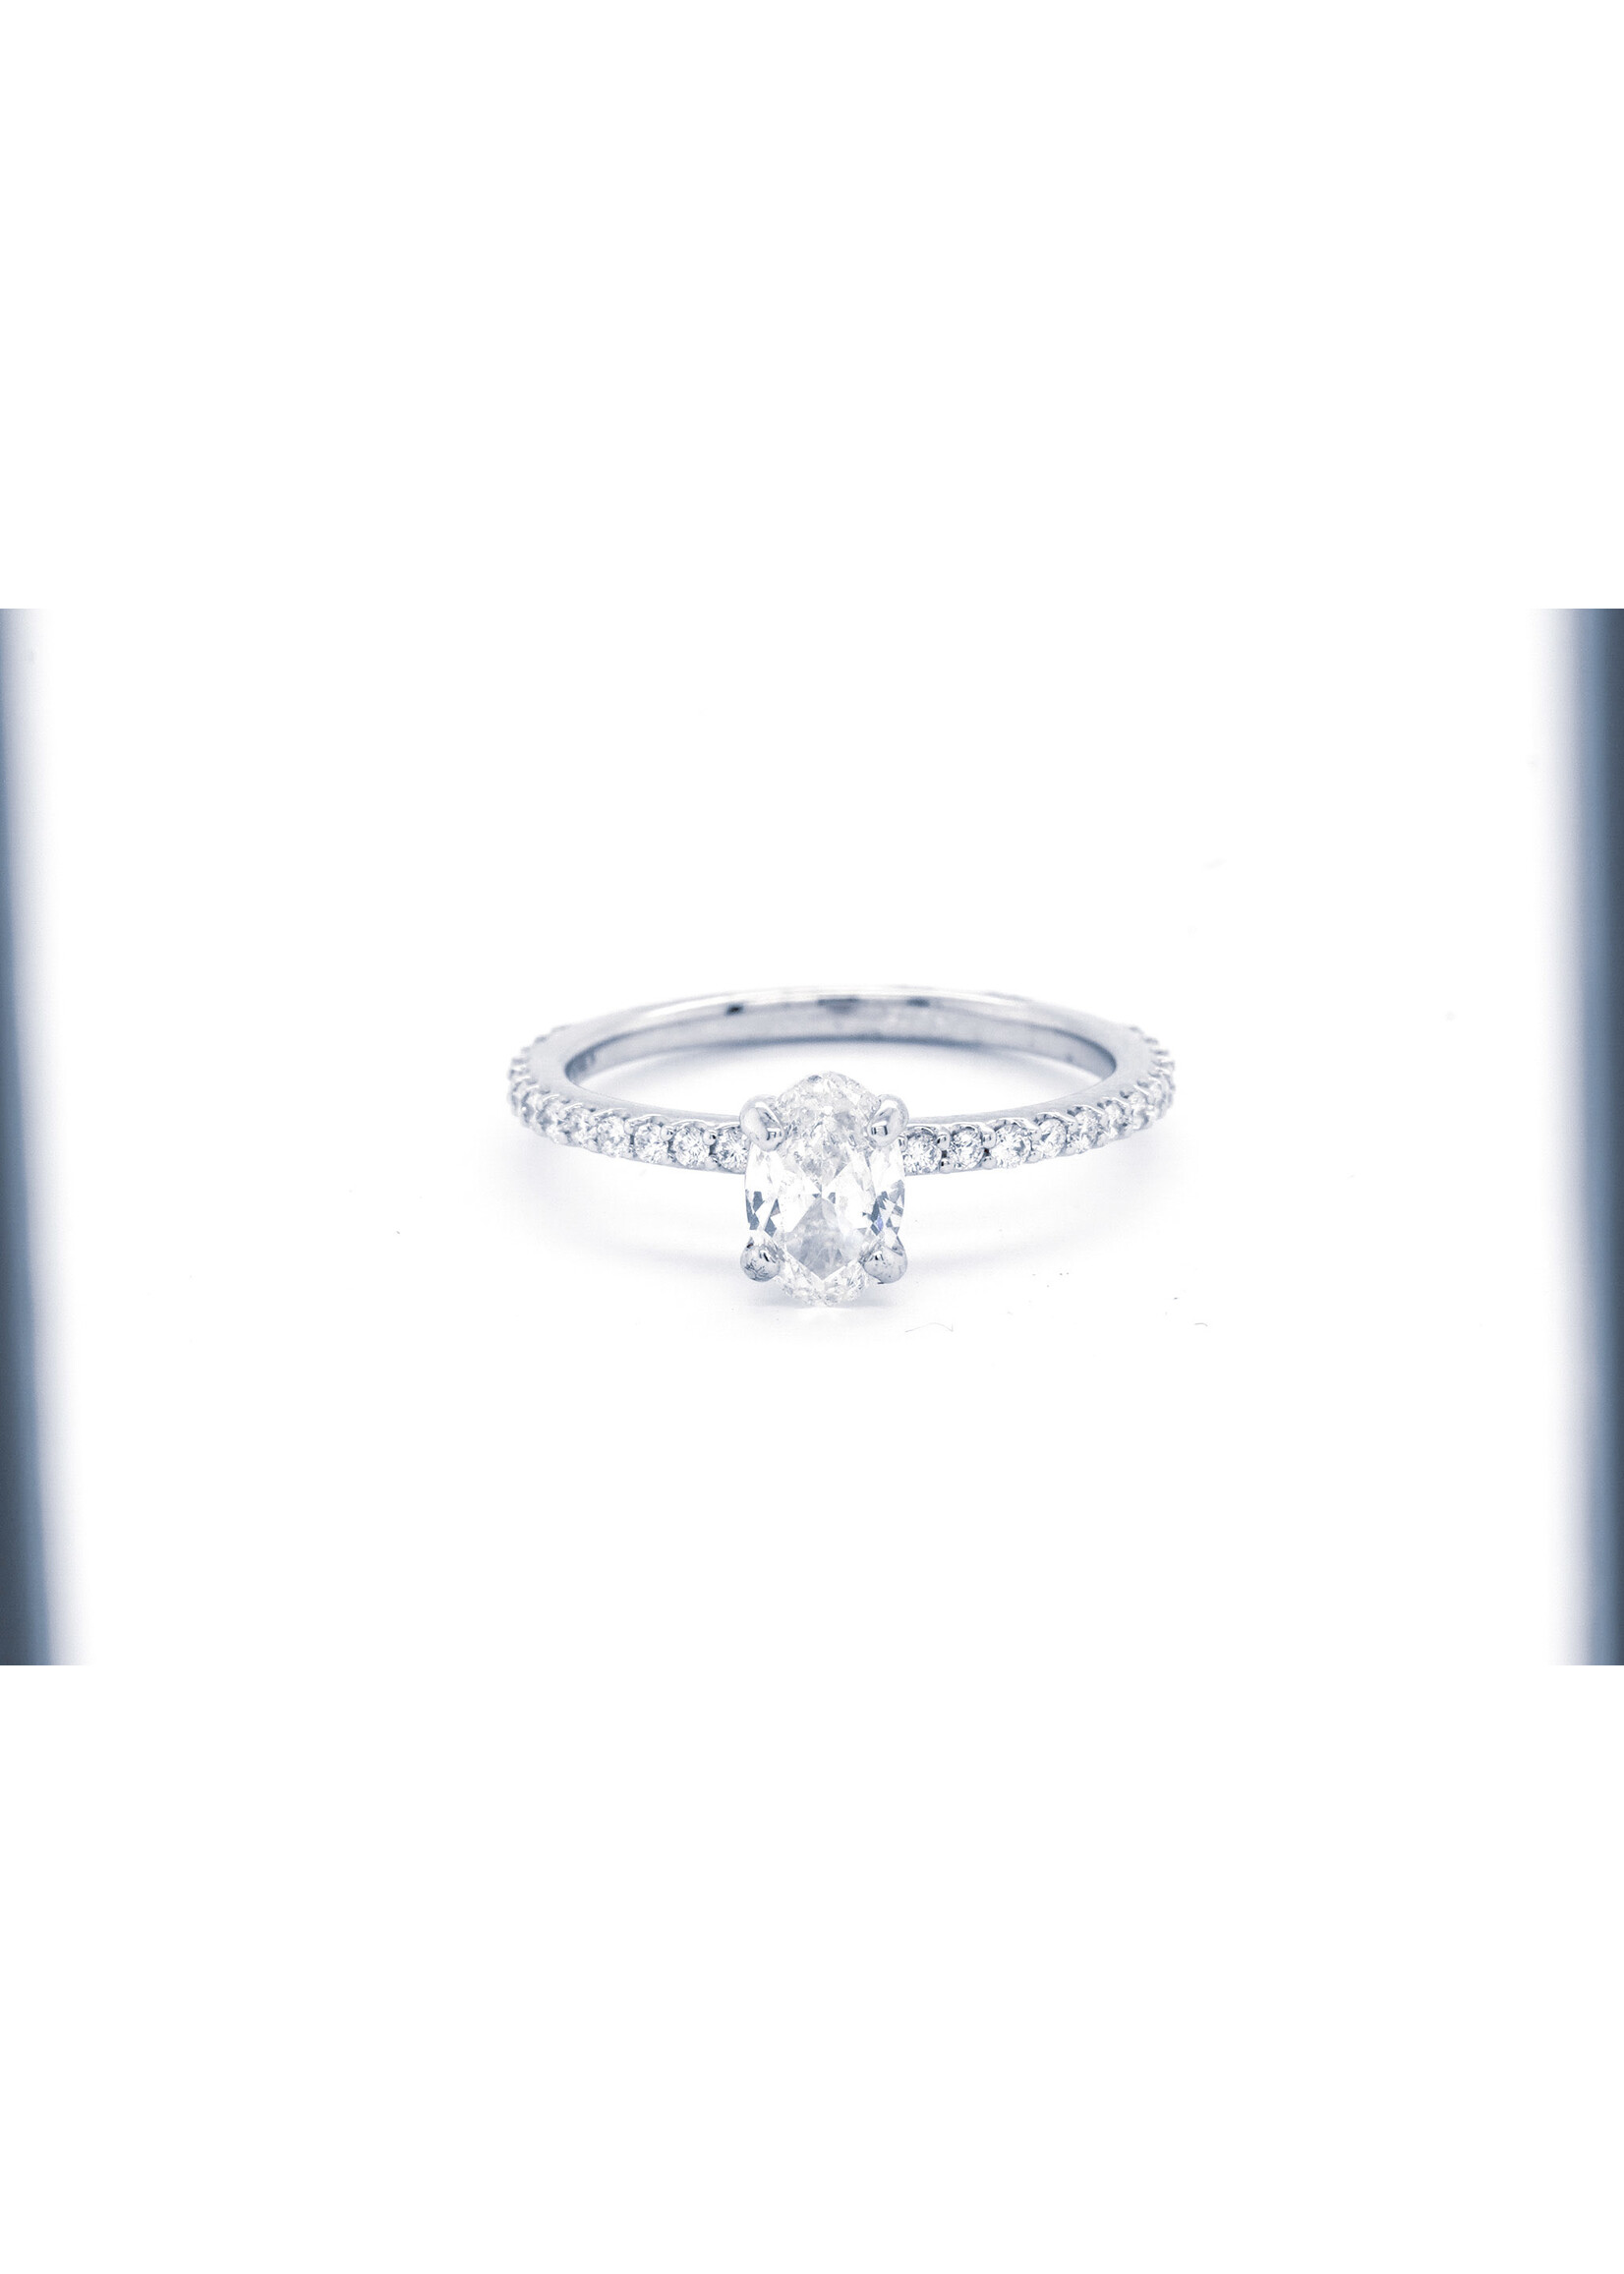 14KW 2.41g 1.02ctw (.72ct) Oval Diamond Engagement Ring (size 7)